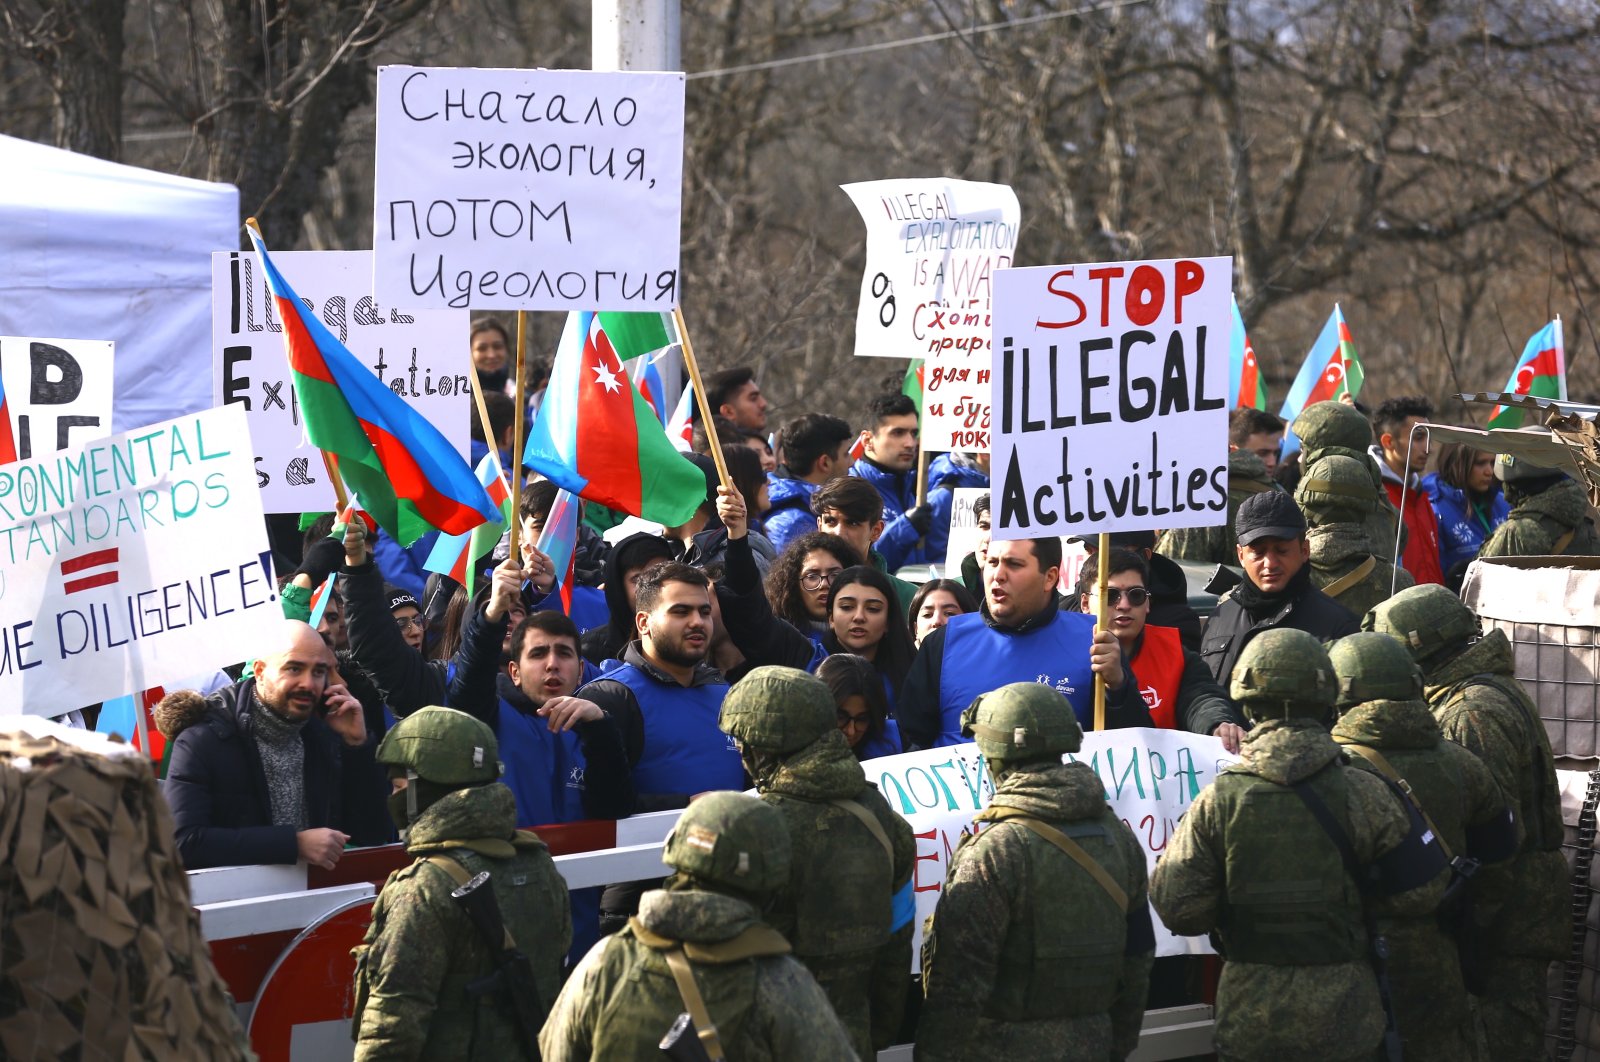 Azerbaijani ecologists and nongovernmental organizations protest the allegedly &quot;illegal exploitation&quot; of mines in the Karabakh region where Armenians live and Russian peacekeepers are stationed, Azerbaijan, Dec. 13, 2022. (AA Photo)